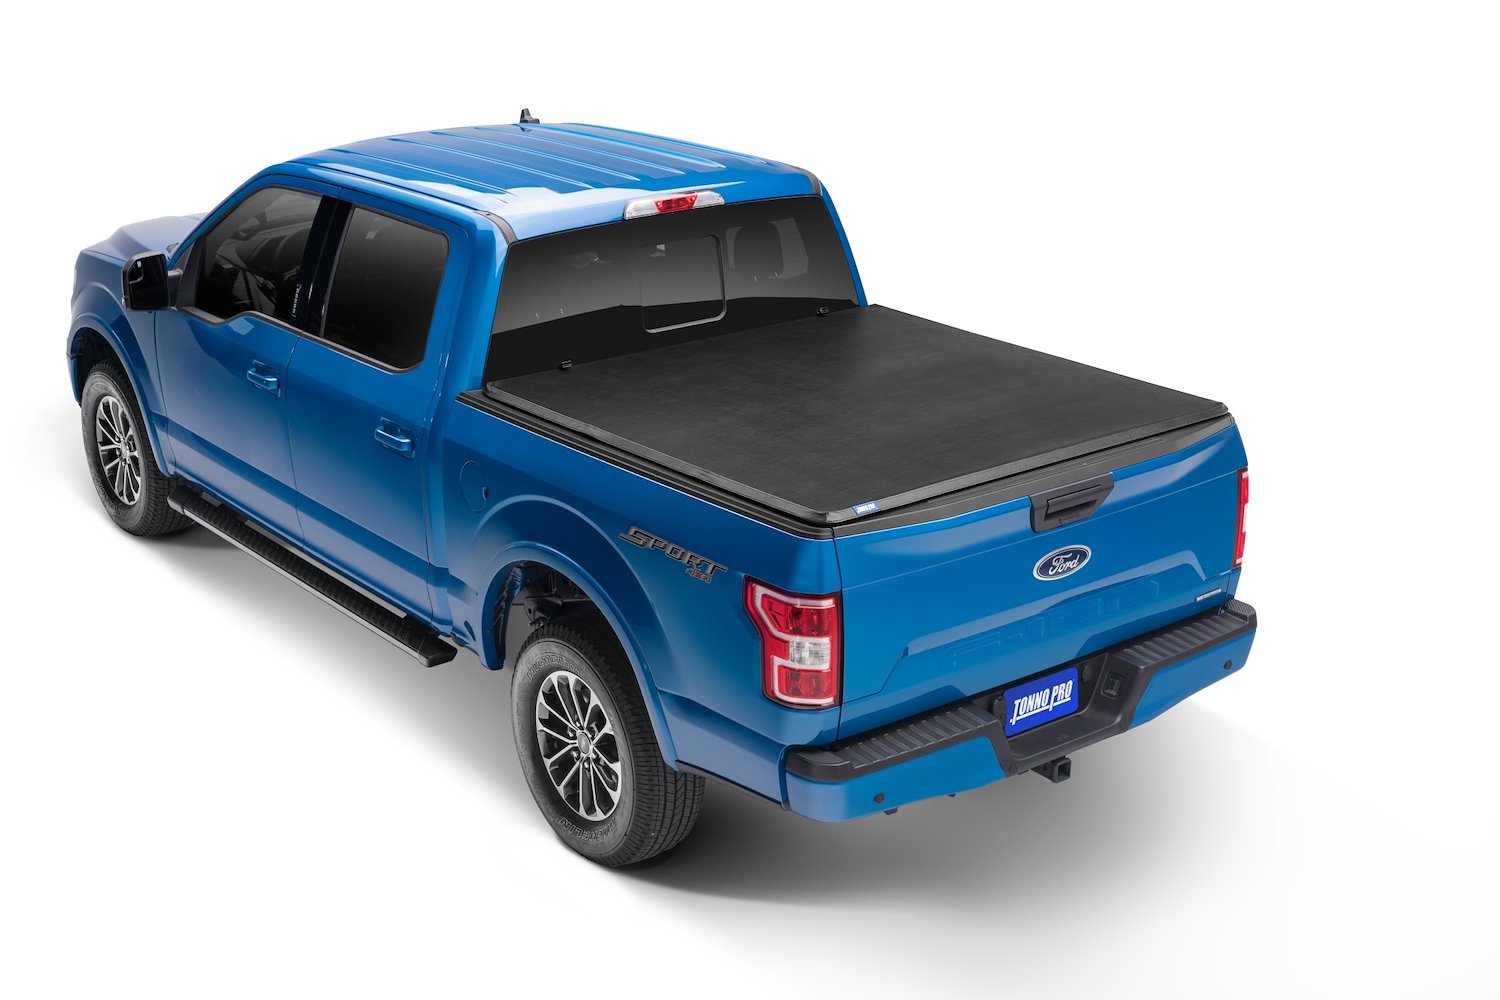 Soft Vinyl Tri-Fold Tonneau Cover Fits Select Ford F-150 Trucks [8 ft. 2 in. Bed]